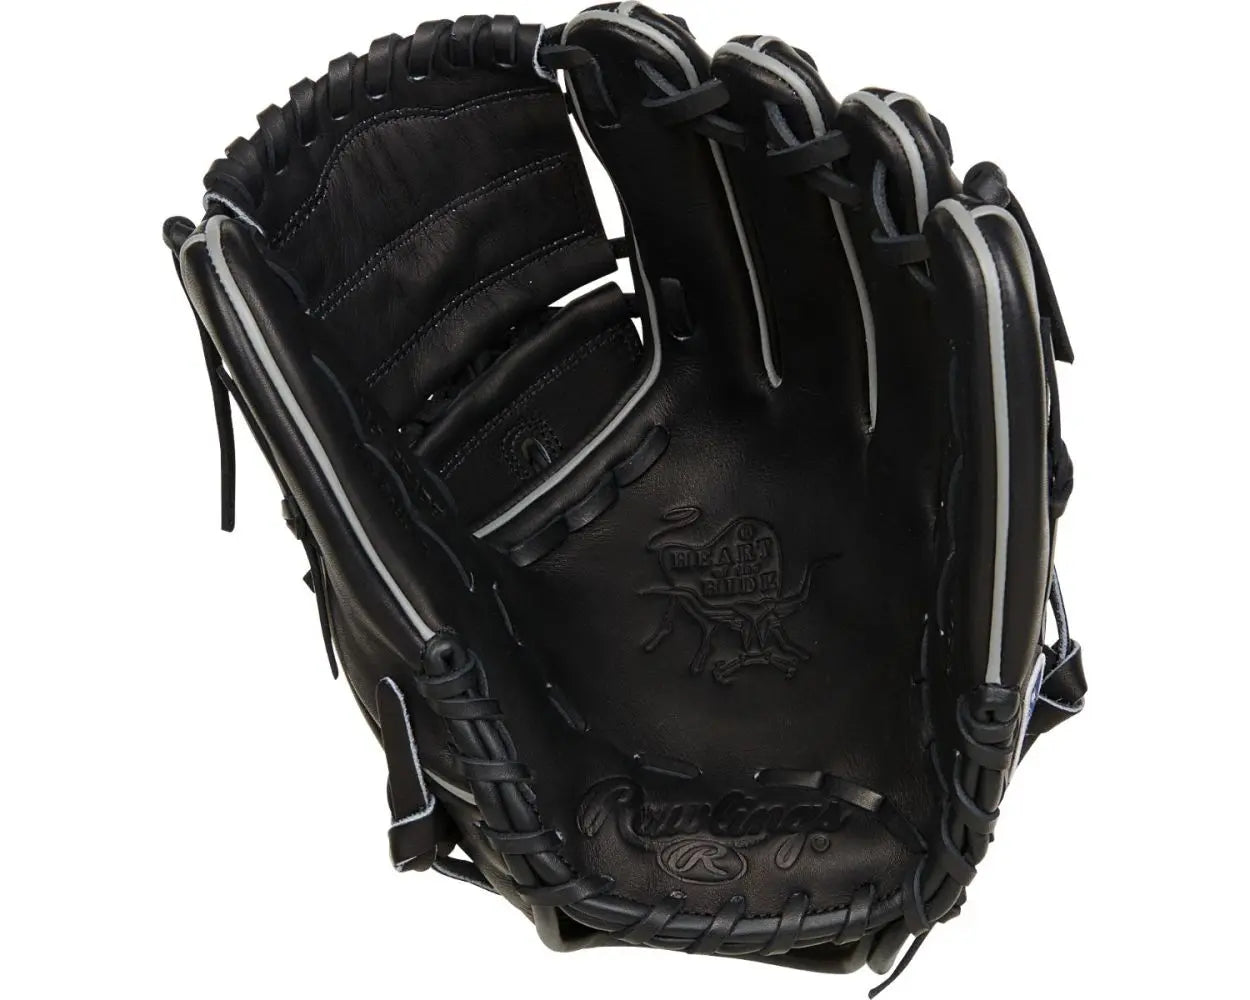 RAWLINGS HEART OF THE HIDE 12" INF/PITCHER'S GLOVE: RPROT206-9B